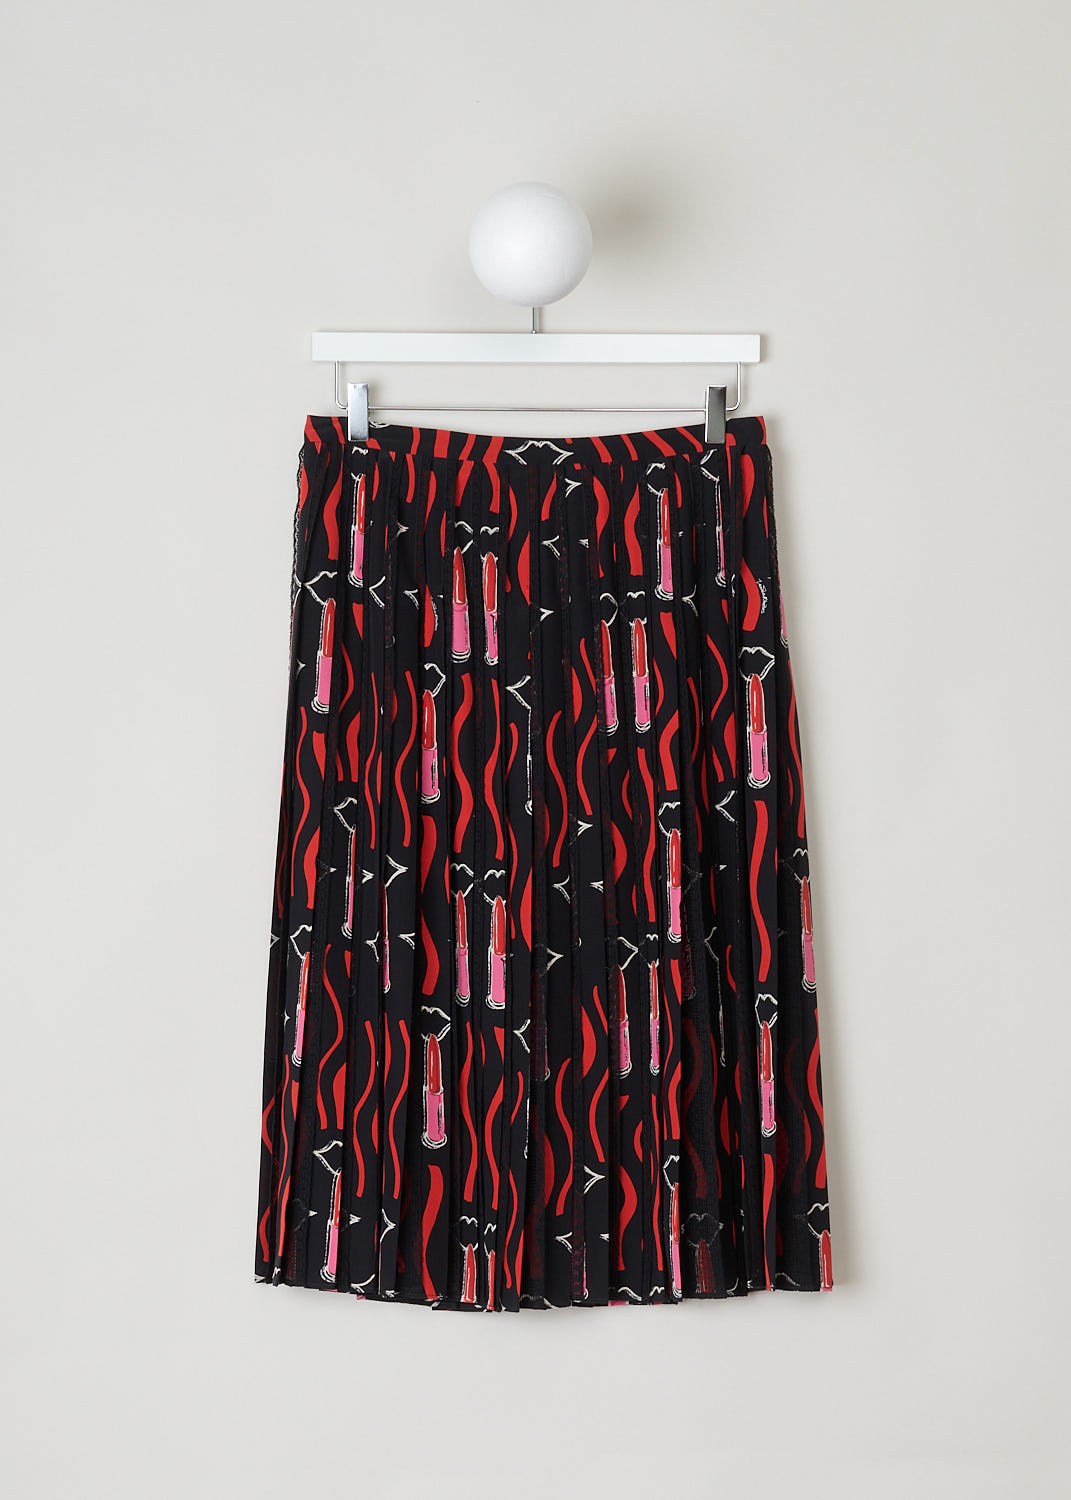 VALENTINO, MULTICOLORED PLEATED SKIRT, PB3RA3G53NV_0D4, Black, Red, Print, Front, Beautifully pleated skirt with multicolored lipstick print. The pleats are decorated with scalloped eyelash trims. The skirt comes with a concealed snap button closure in the back. The skirt is fully lined. 